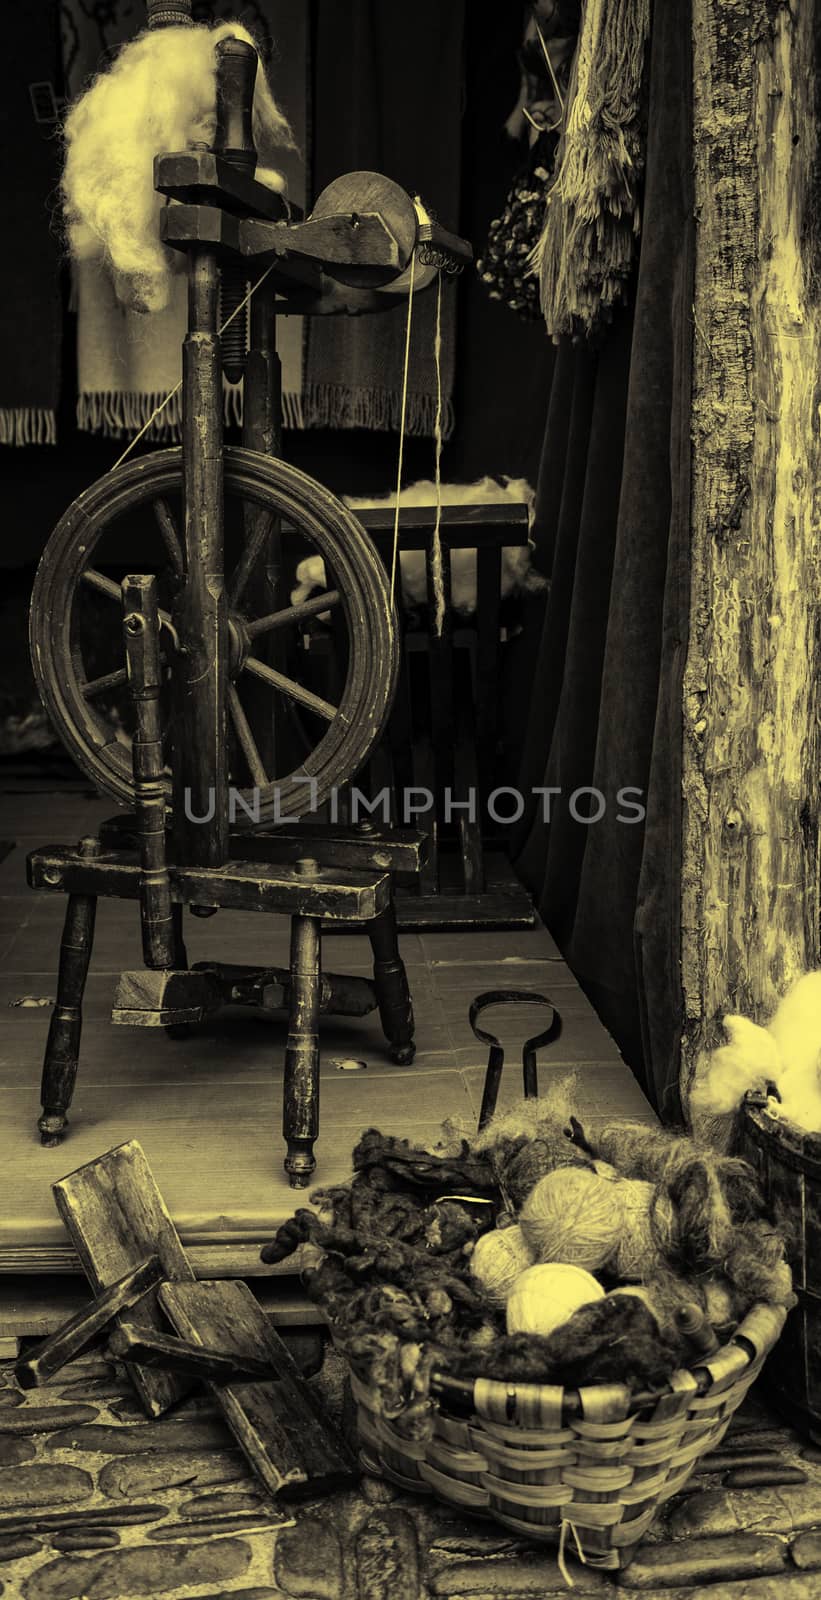 Tools for making wool, traditional objects for virgin wool